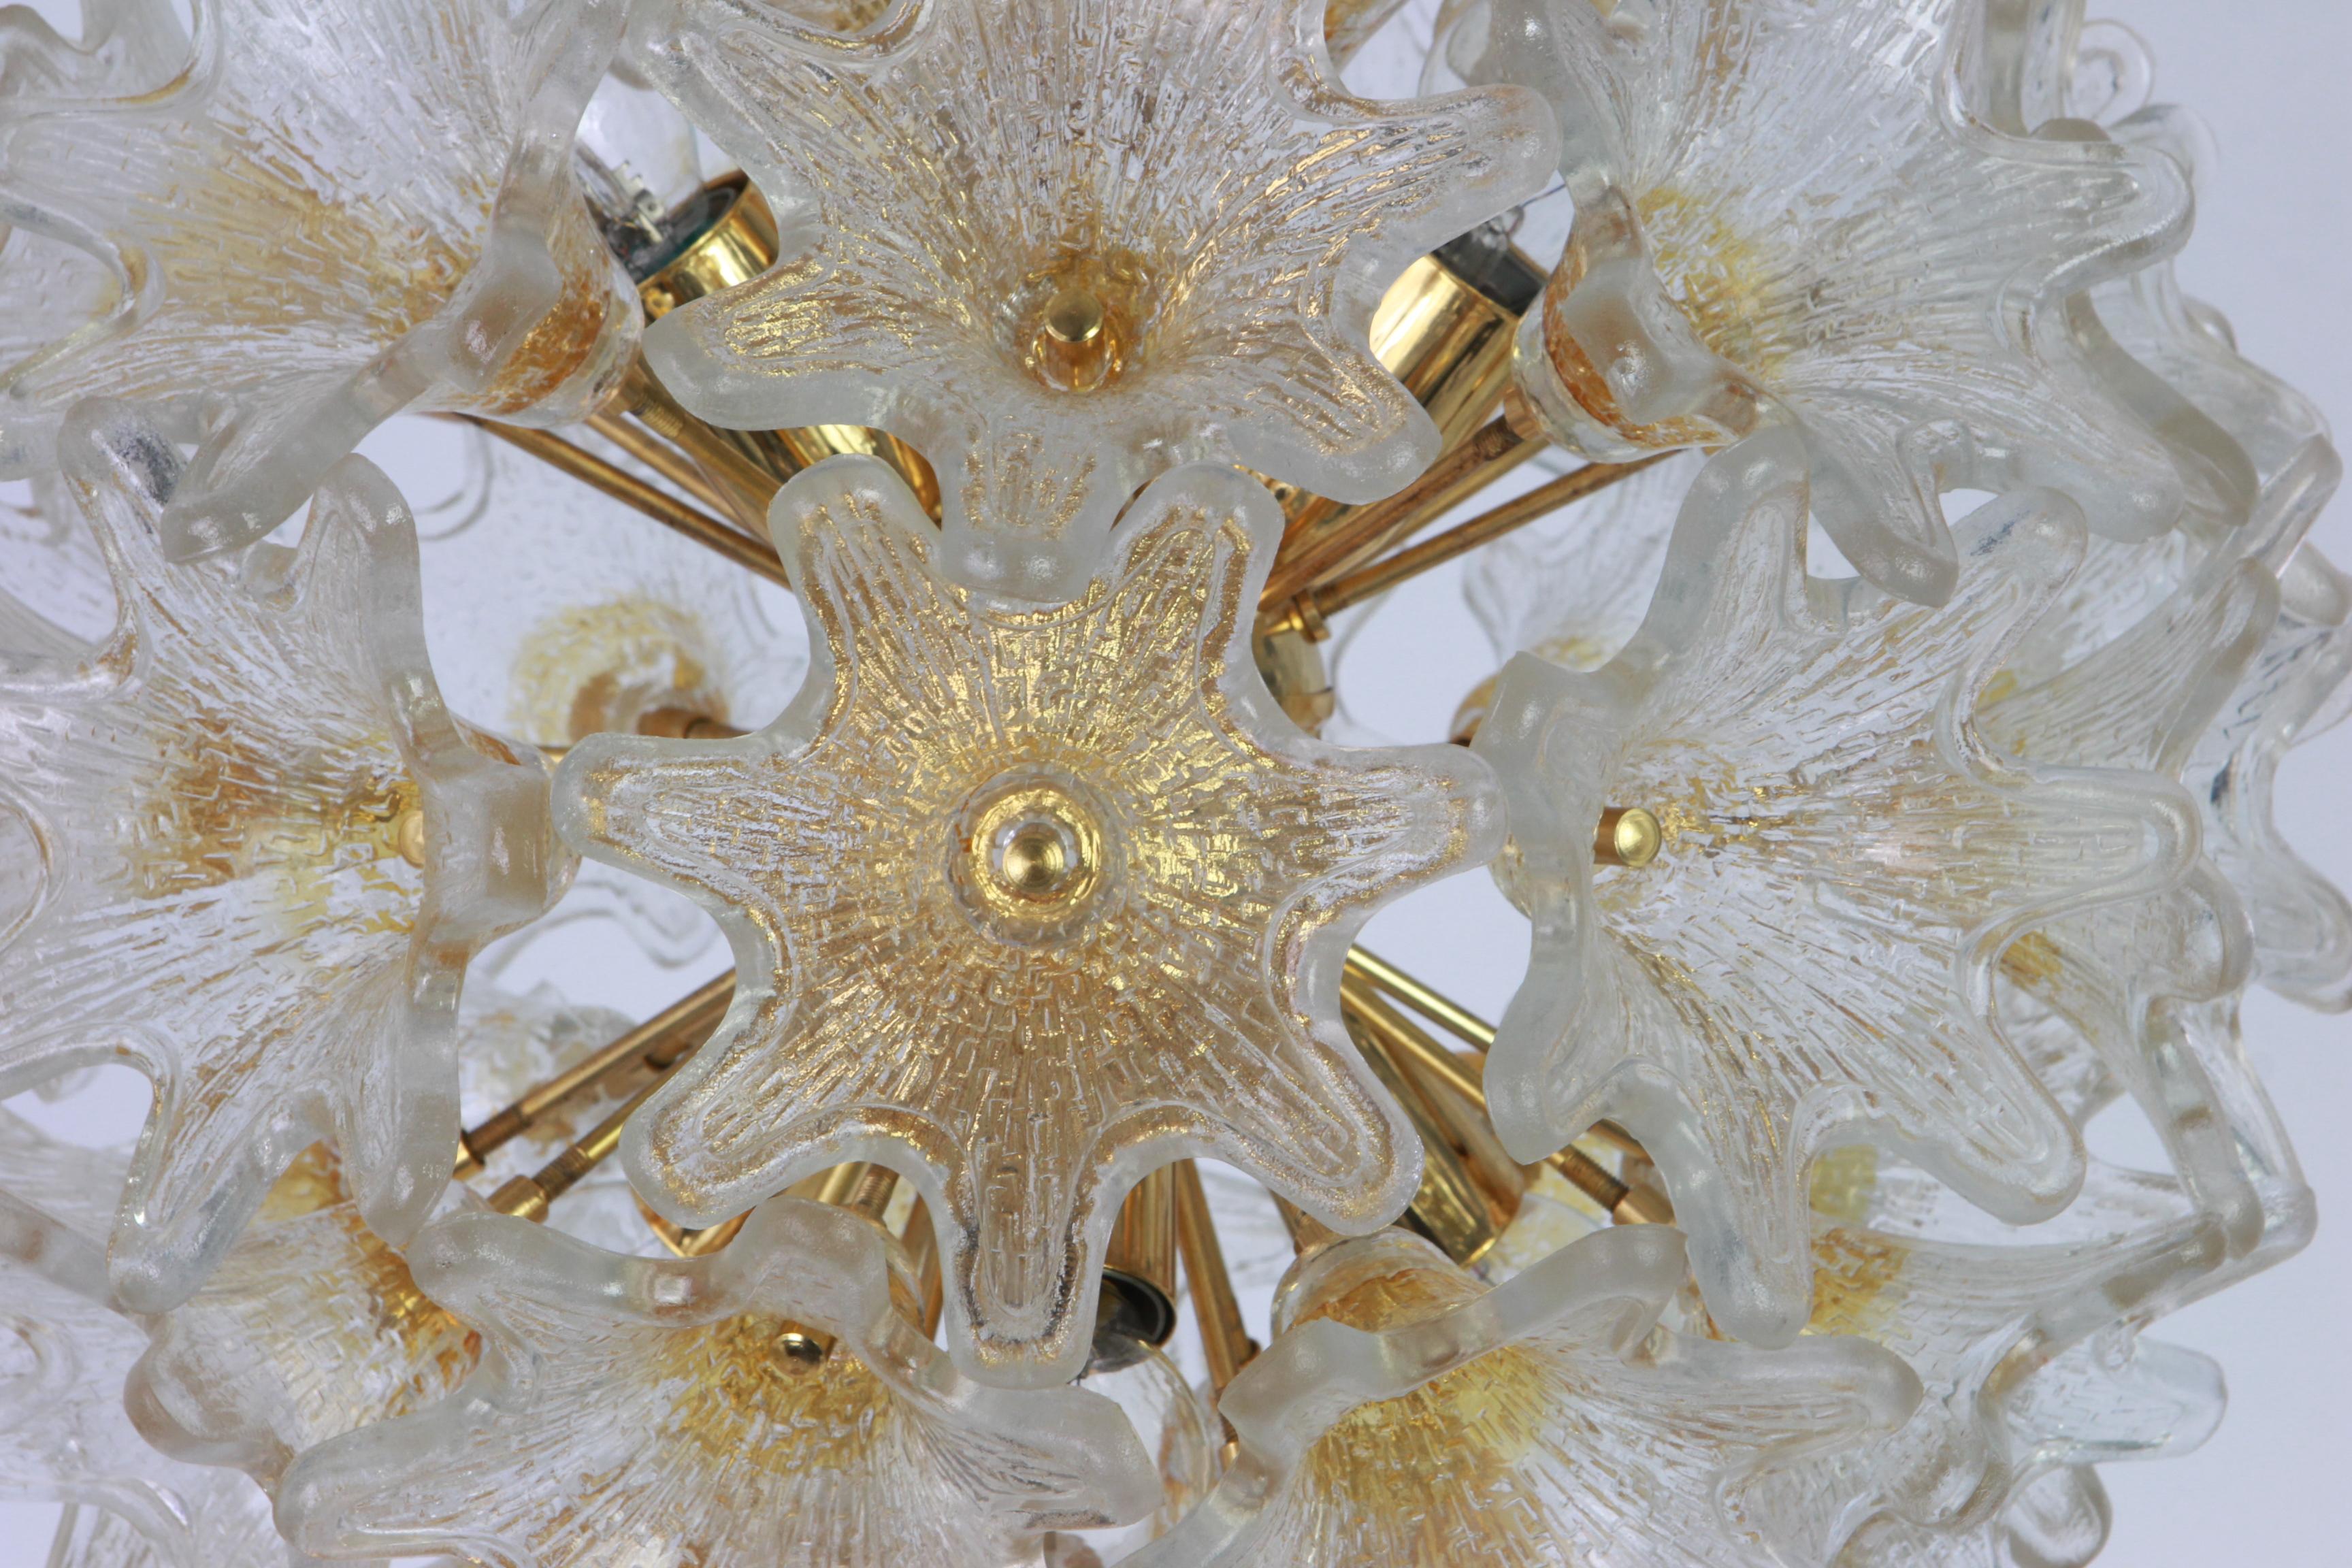 Spectacular Murano glass and brass sunburst flower chandelier by Venini for VeArt, Italy 1970s
Stunning shape and a great light effect.
All glasses are in good condition, small signs of age on the frame.
It needs six small-size bulbs (E-14 bulbs) up